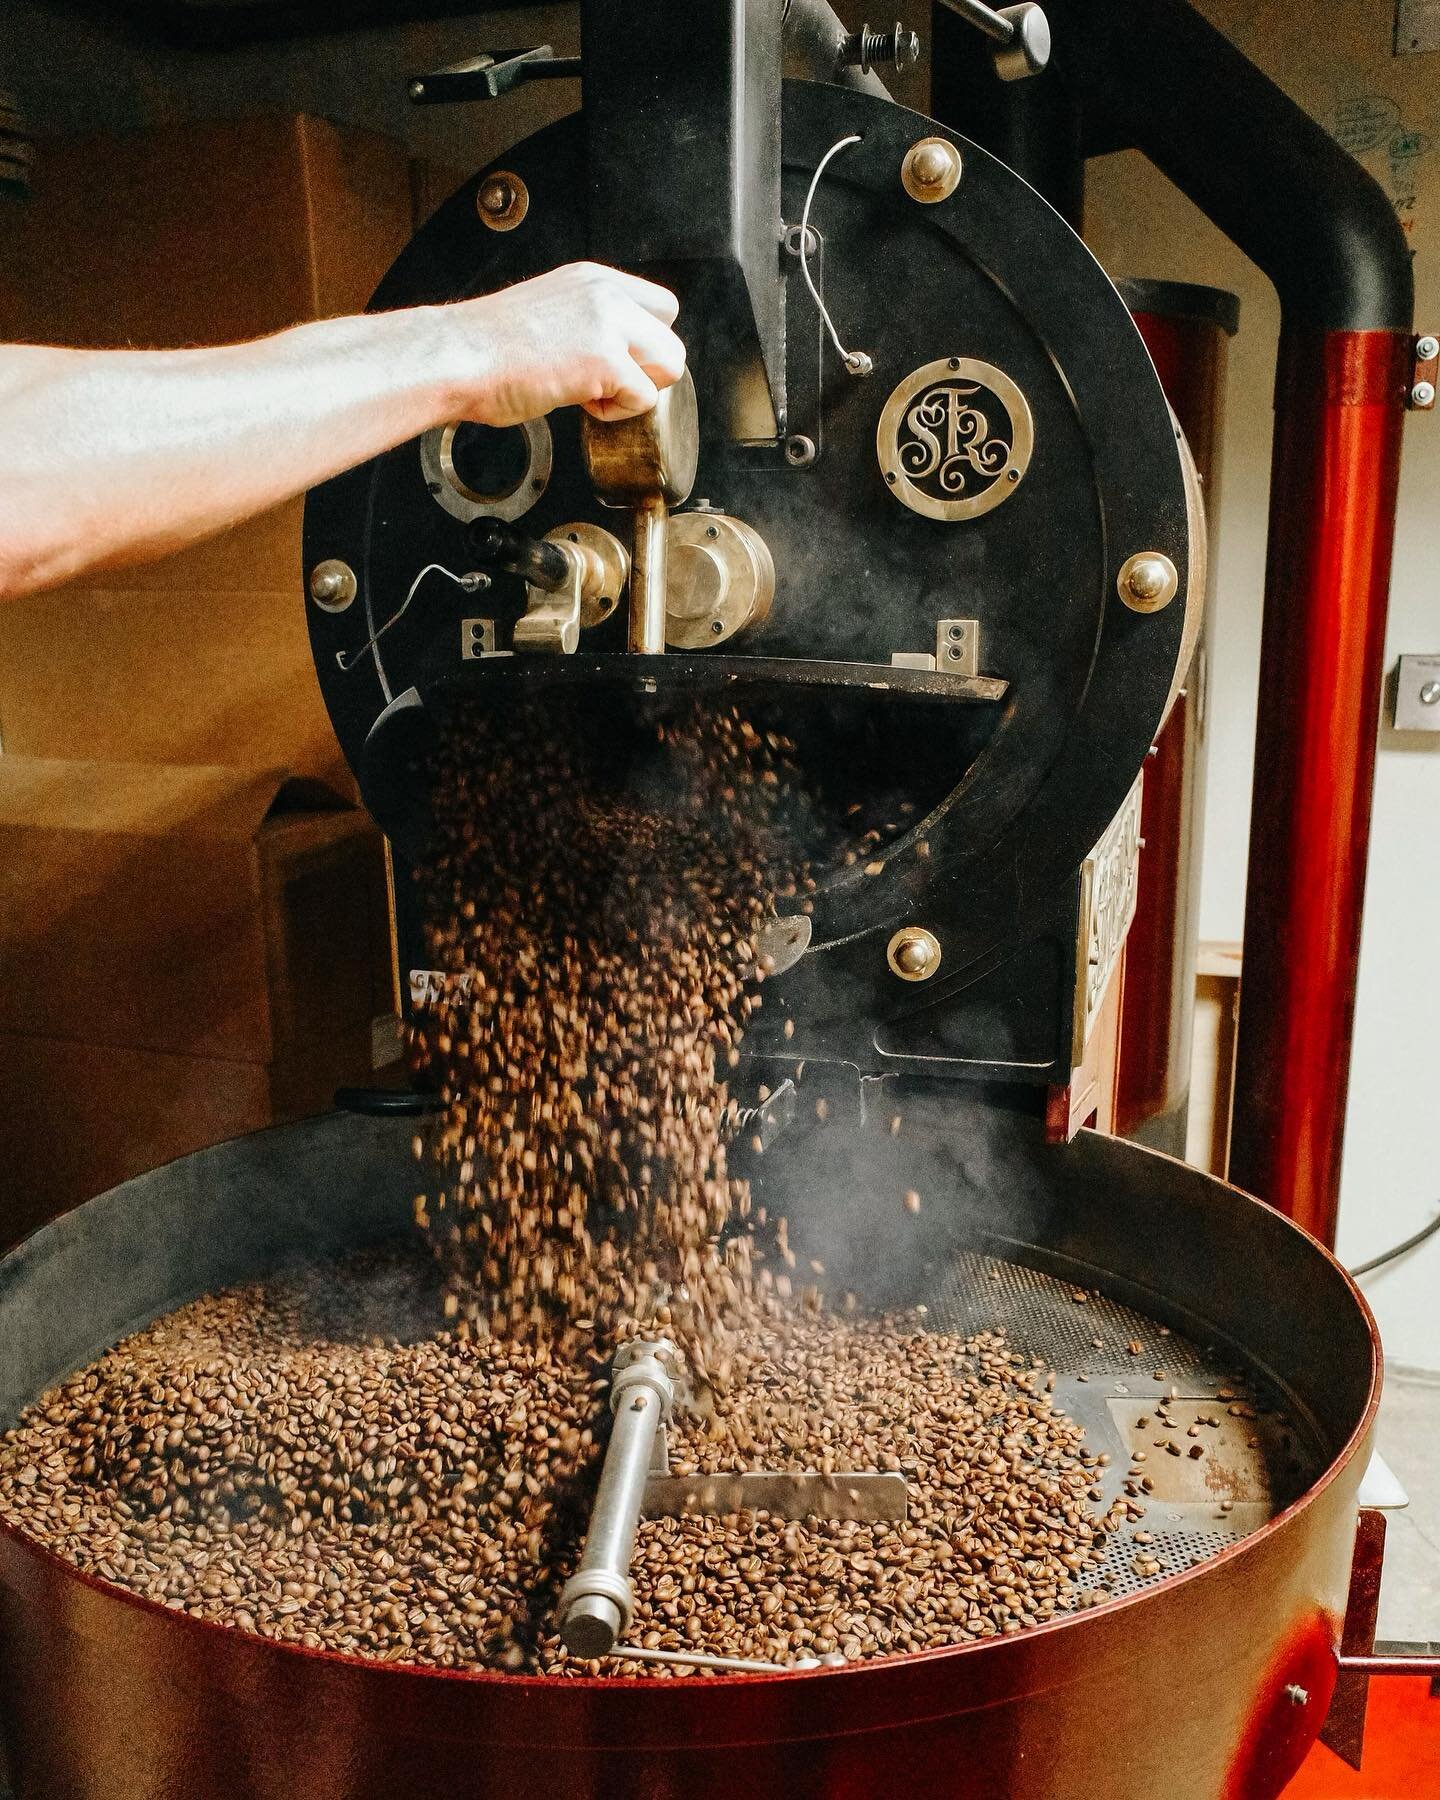 The machine behind the magic - our trusty coffee roaster. Turning green beans into vessels of flavor, one roast at a time!